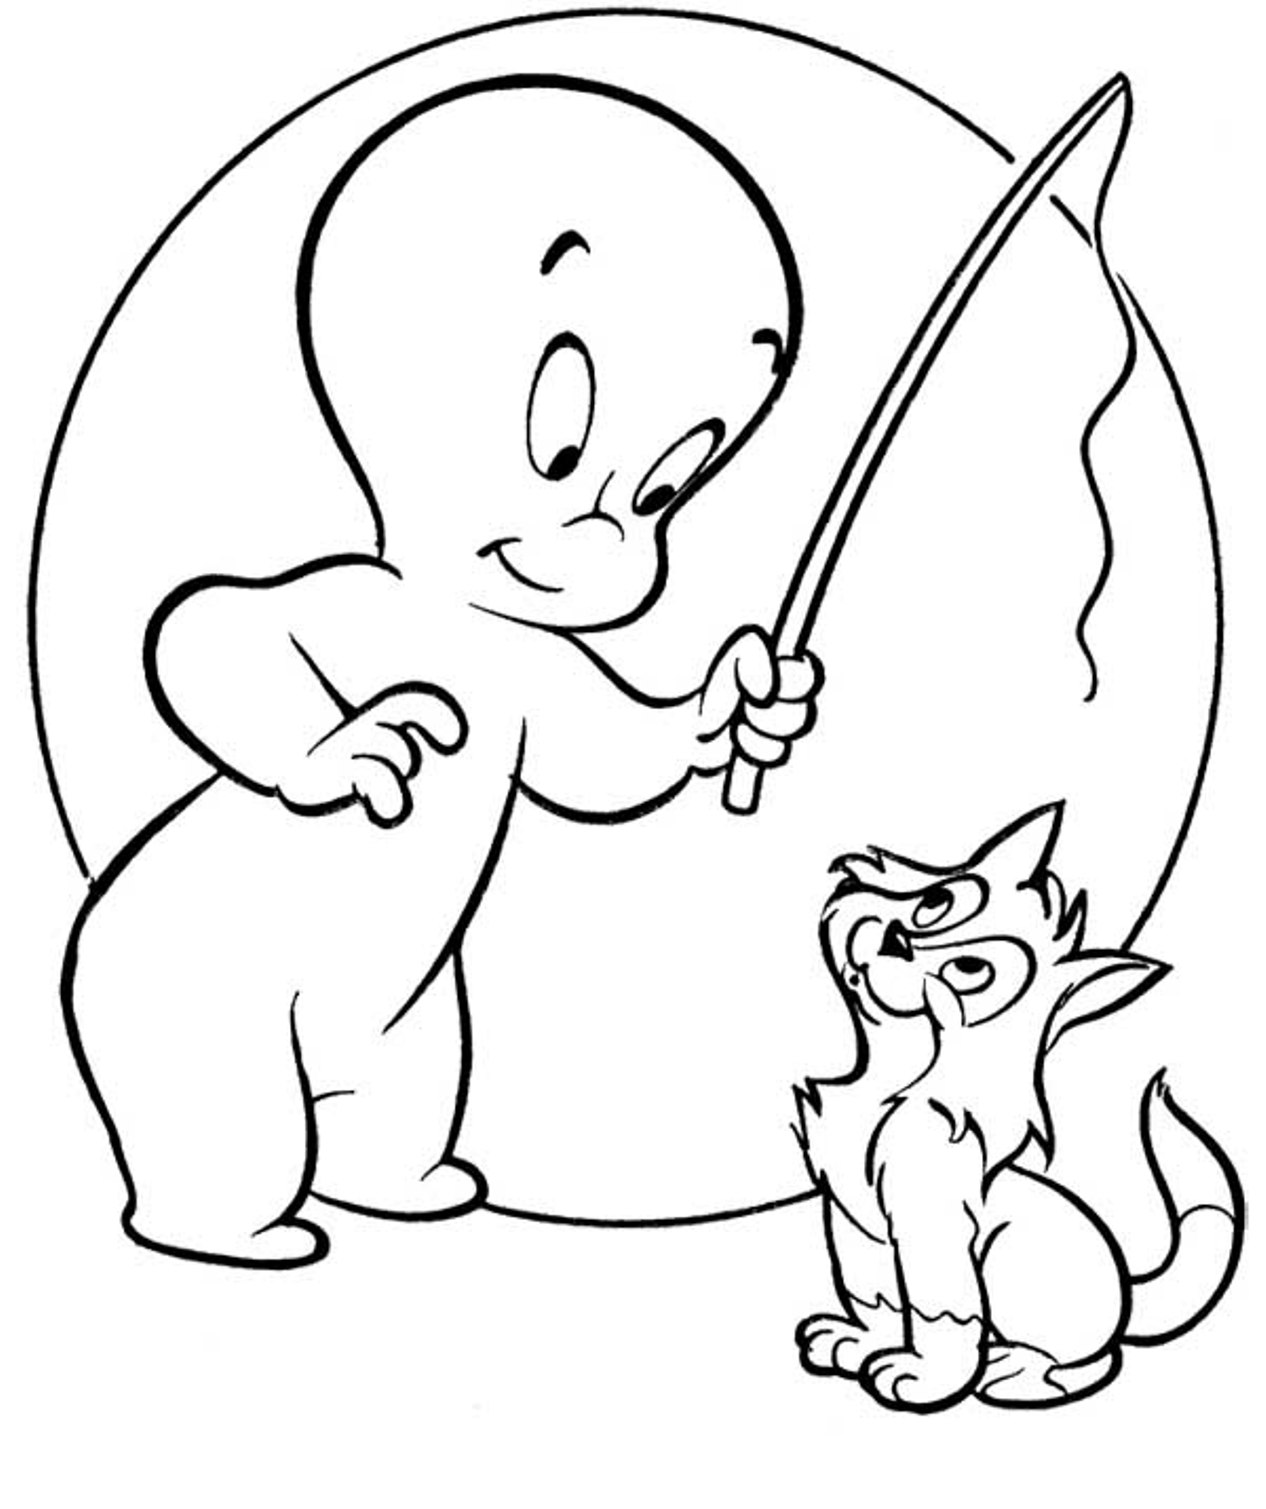 Coloring Pages Ghosts Coloring Pages and Clip Art Free